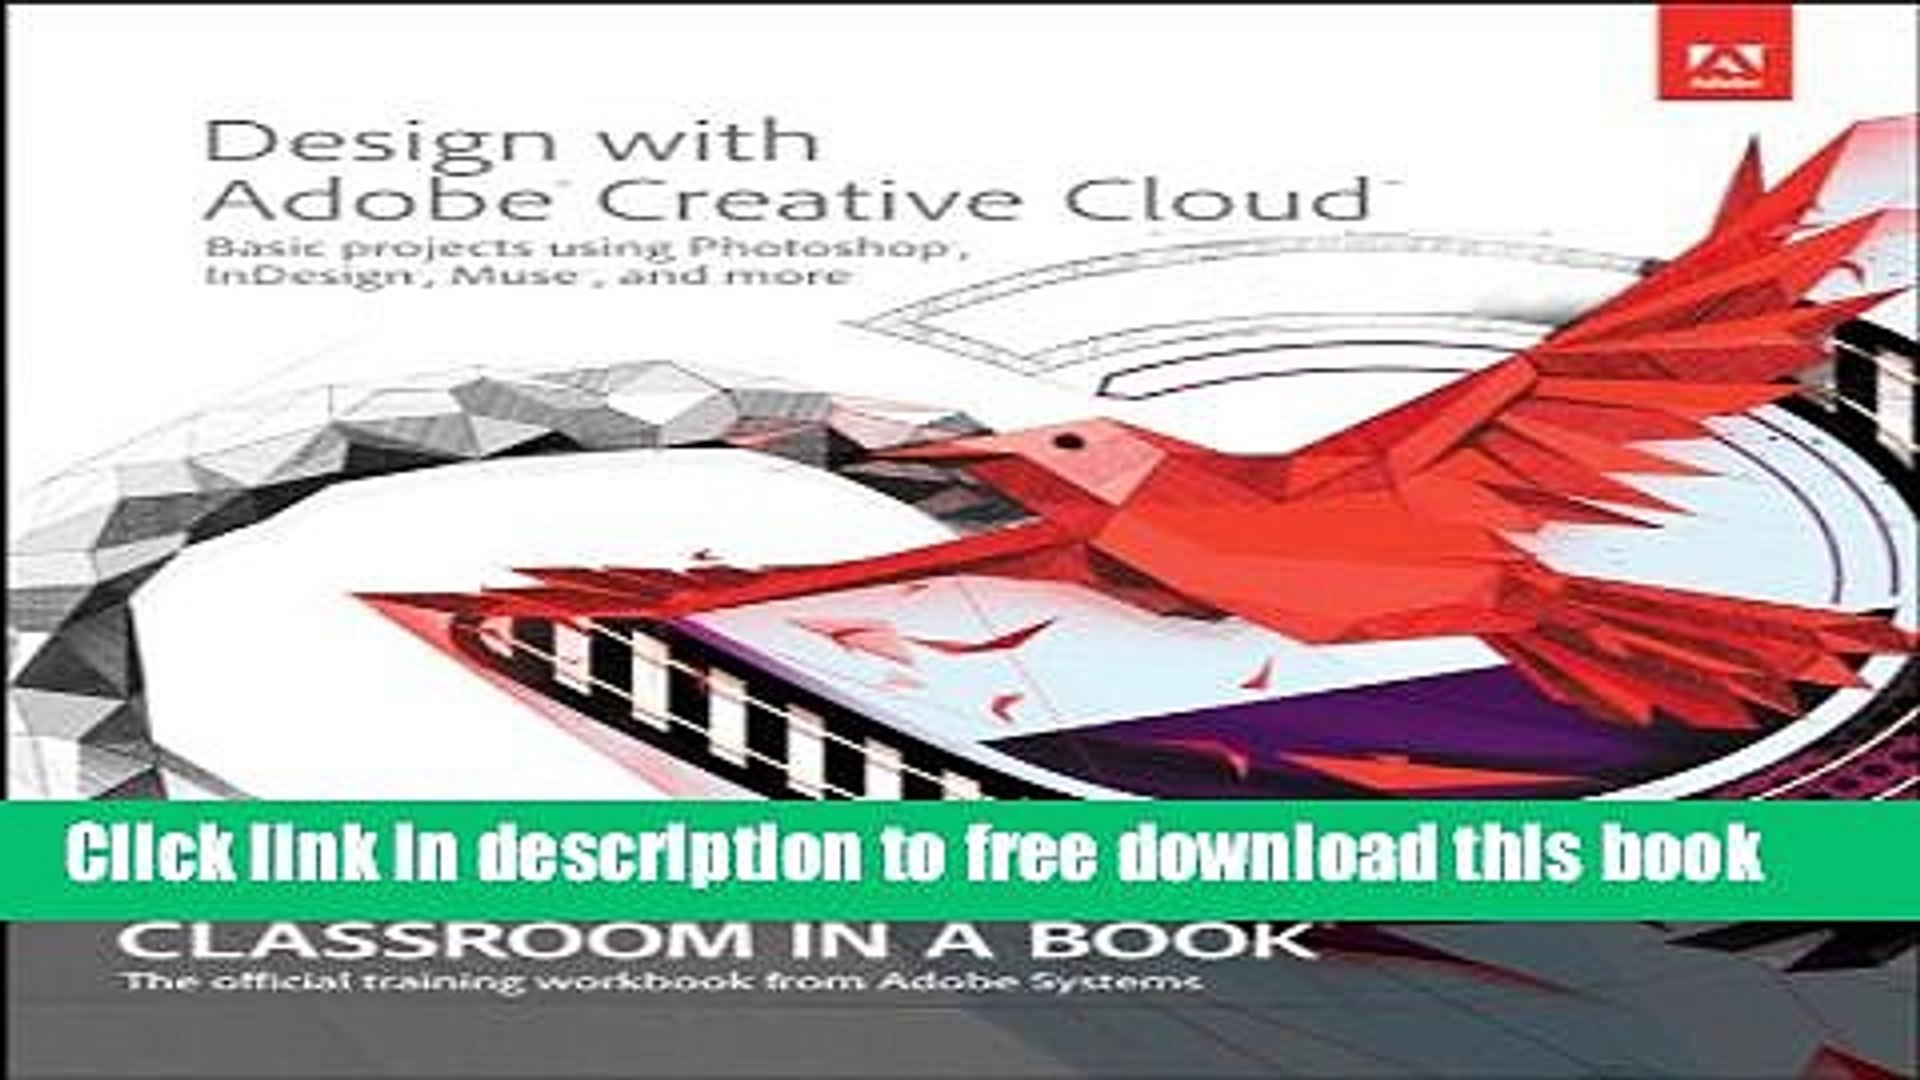 InDesign and More Muse Design with Adobe Creative Cloud Classroom in a Book: Basic Projects using Photoshop